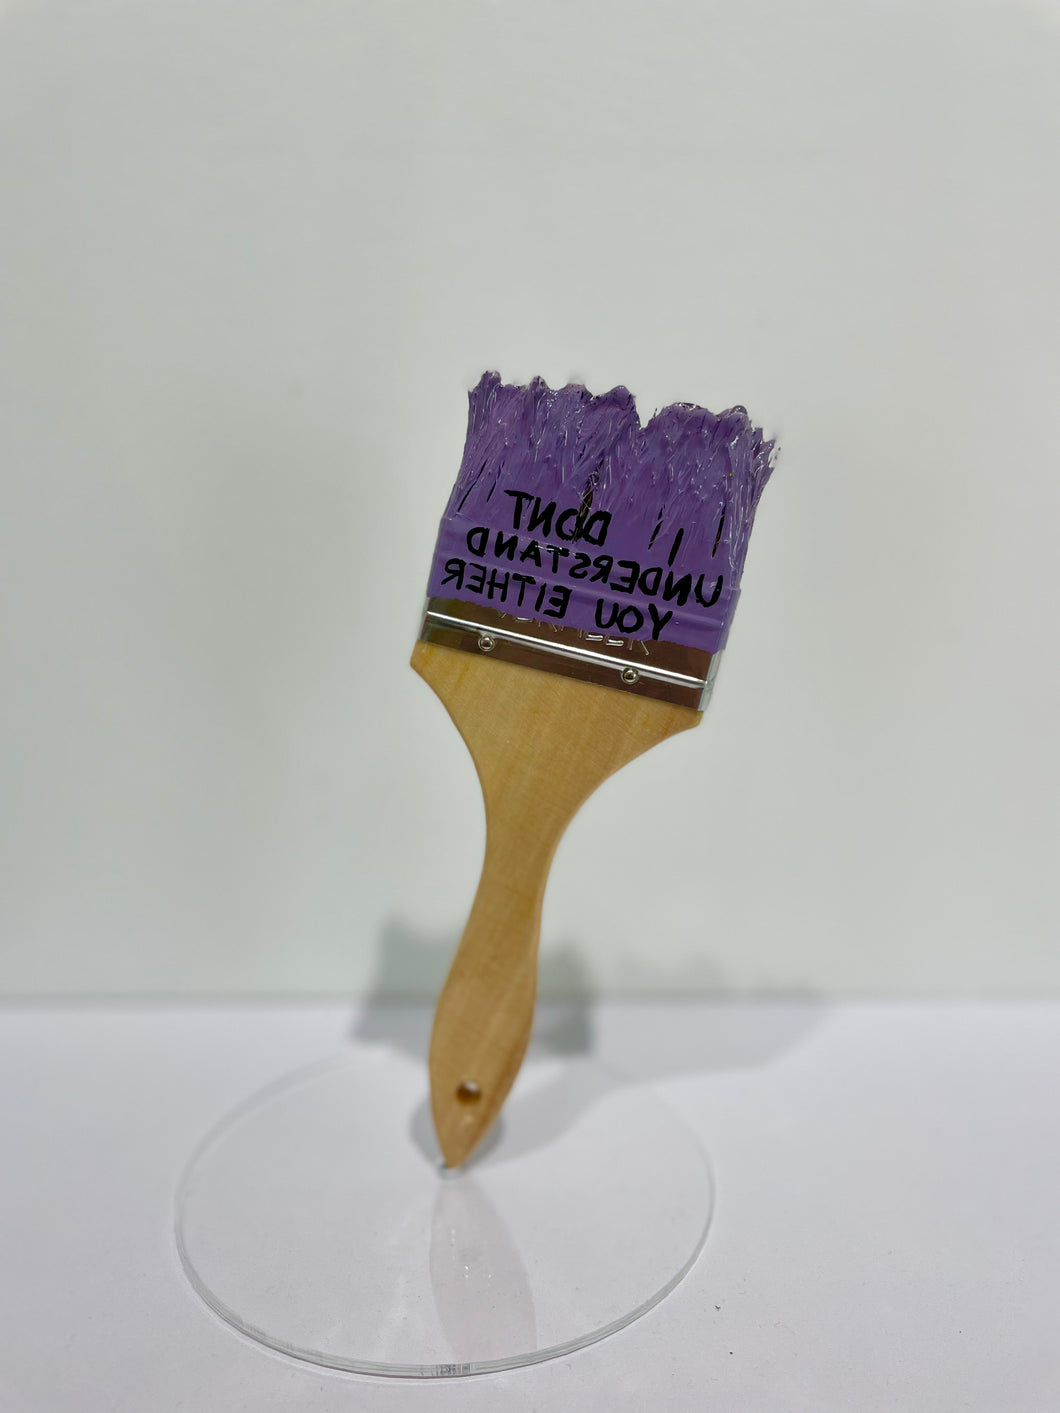 Paint Brush Sculpture - I Don't Understand You Either